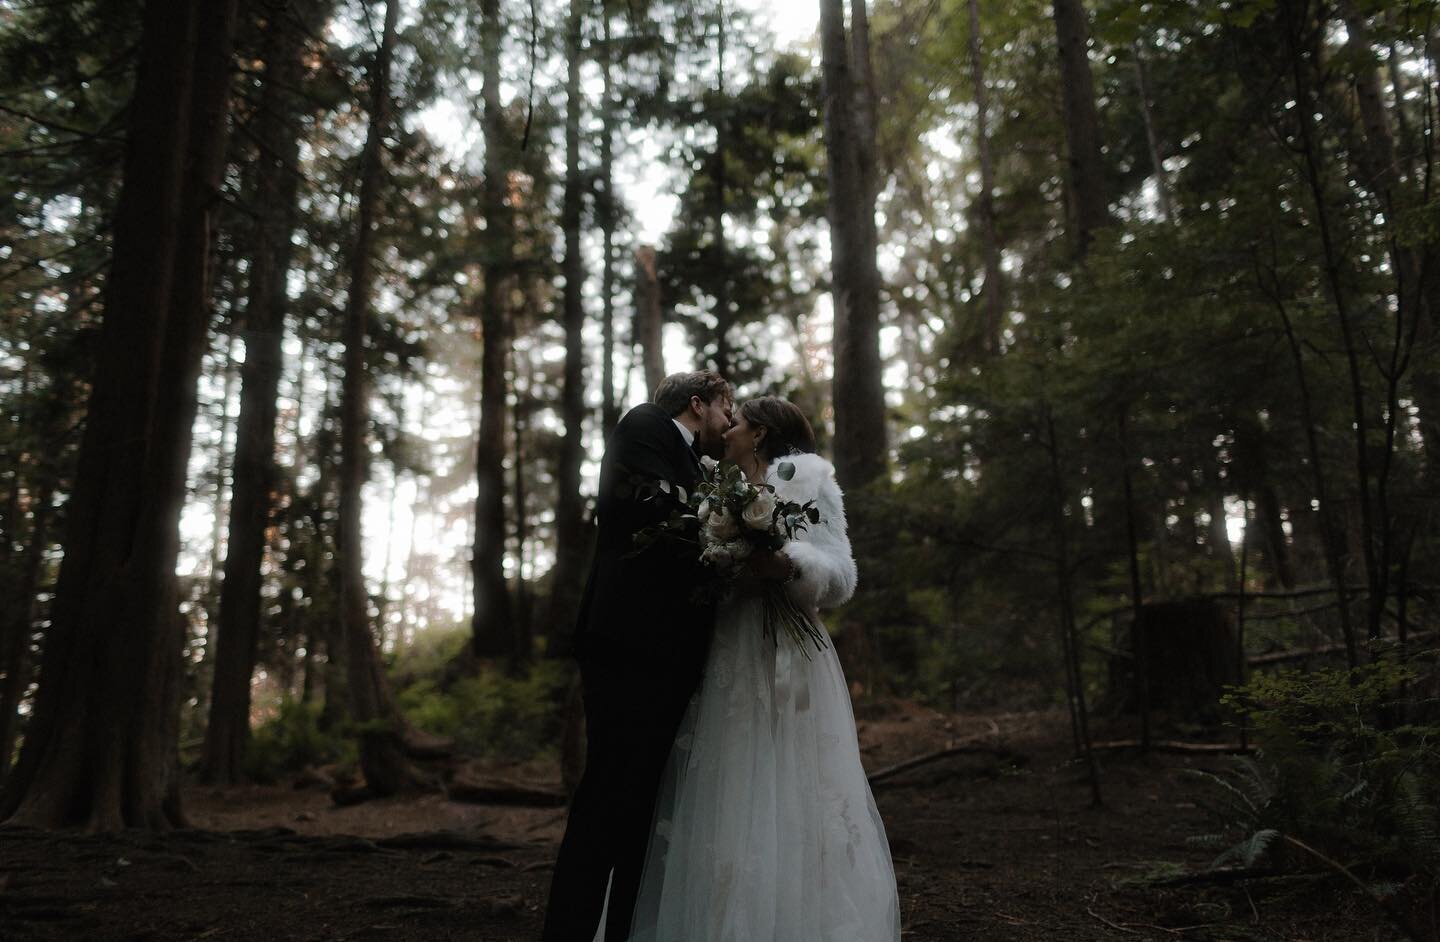 A gilmse at this moment we filmed Natalie &amp; Luke romance on their wedding day in Vancouver.
I got to take a few shots while filming their love at the end of their day.
We drove one hour after dinner to arrive just in time for the end and the gold